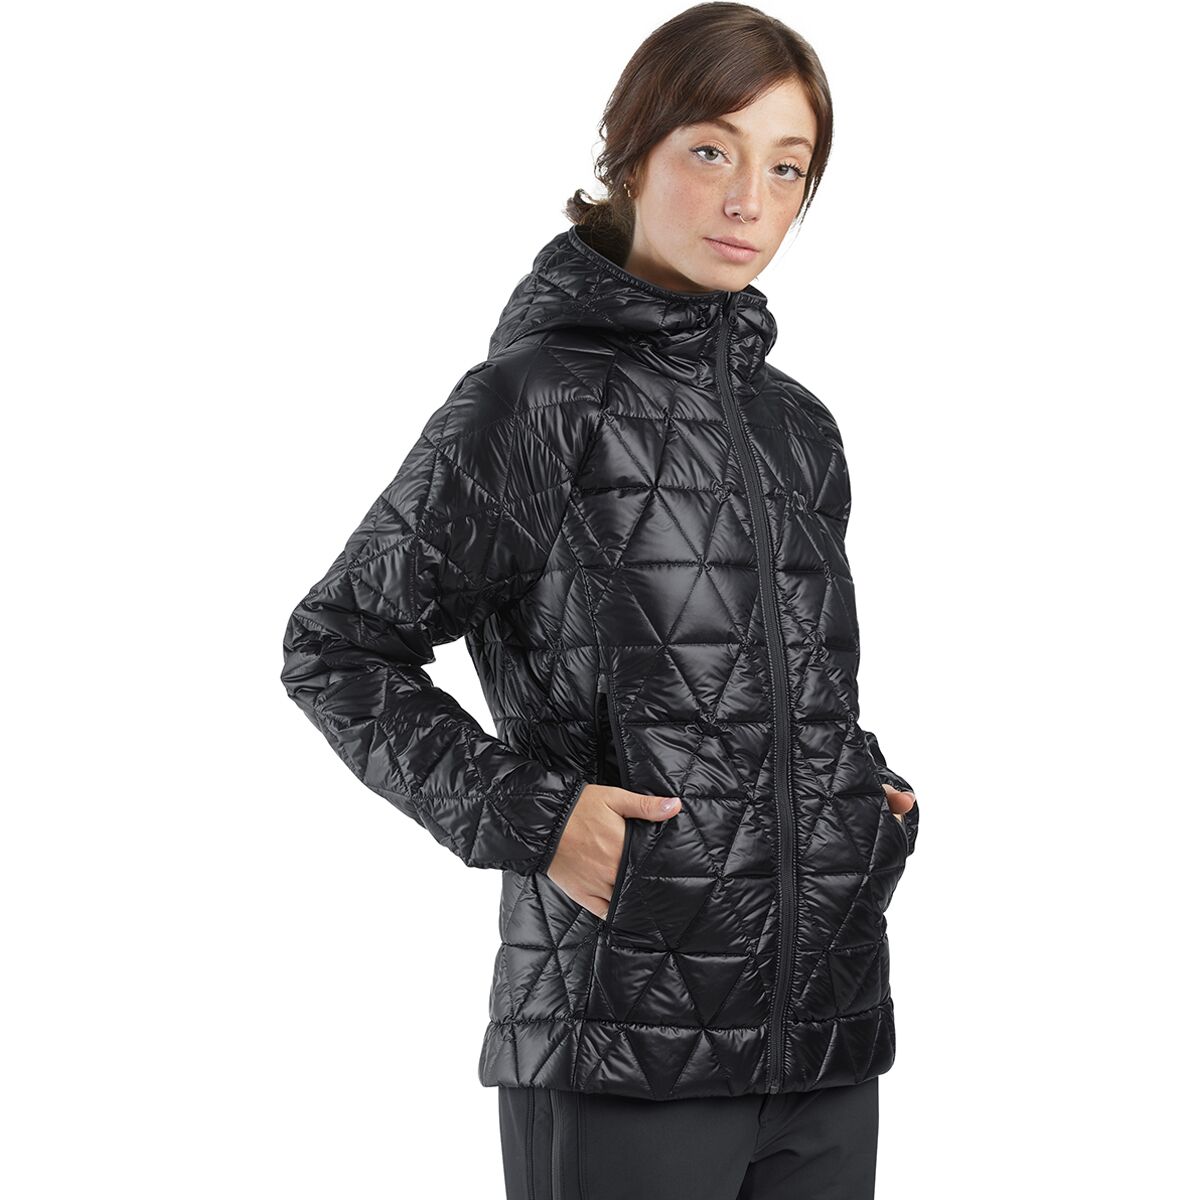 Outdoor Research Helium Insulated Hooded Jacket - Women's